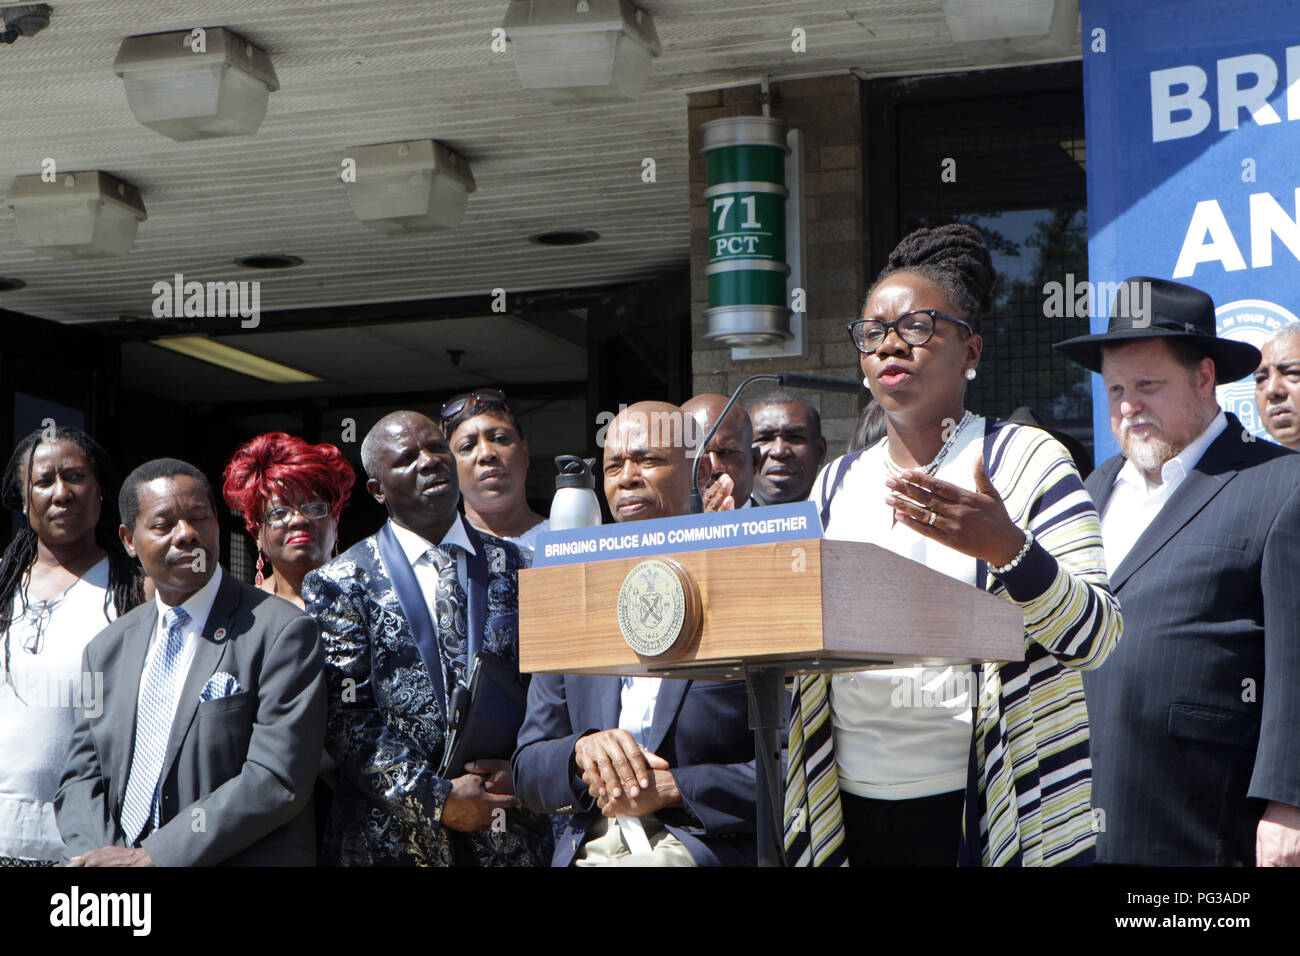 Brooklyn, NY, USA. 23rd Aug, 2018. New York City Mayor Bill De Blasio along with Brooklyn Borough President Eric Adams, New York City Council Member Alicka Ampry-Samuel, NYPD Chief of Patrol, Rodney Harrison along with several community leaders announce plan to redesign the entrance and waiting areas of four Brooklyn Precincts (71st, 73rd, 75th and 77th precincts) on August 23, 2018 in the Crown Heights section of Brooklyn, New York. Credit: Mpi43/Media Punch/Alamy Live News Stock Photo